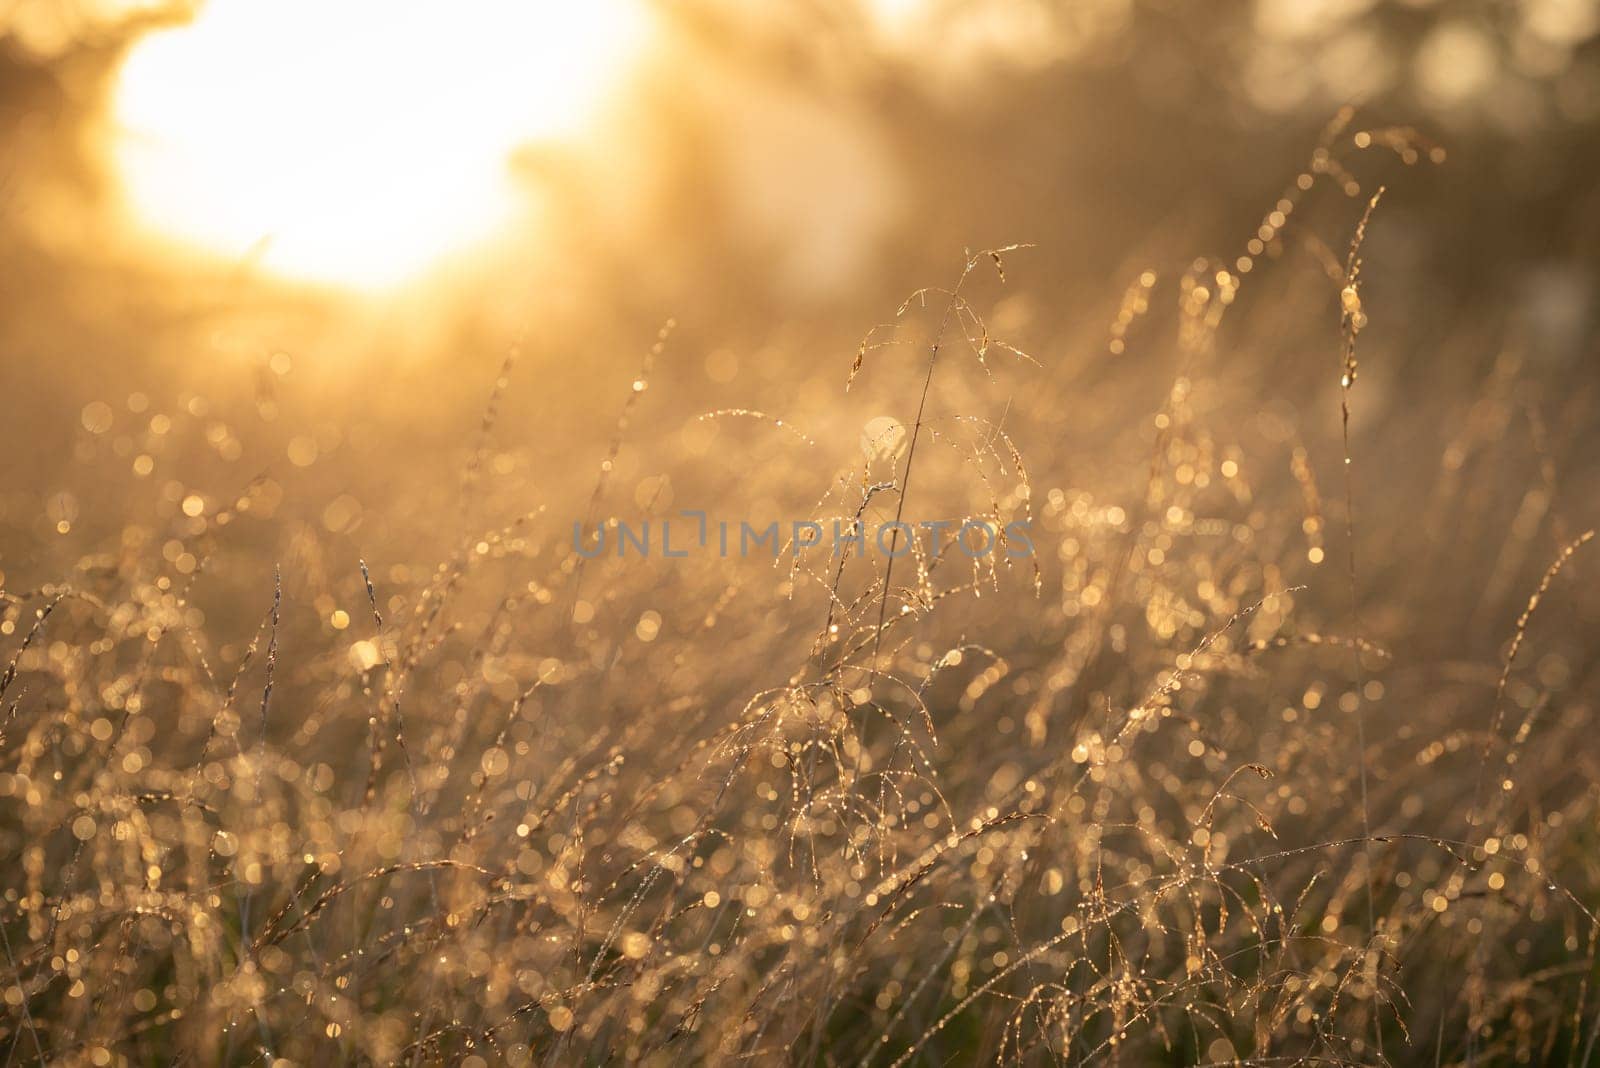 Bright landscape of grass in morning dew against rising sun by VitaliiPetrushenko